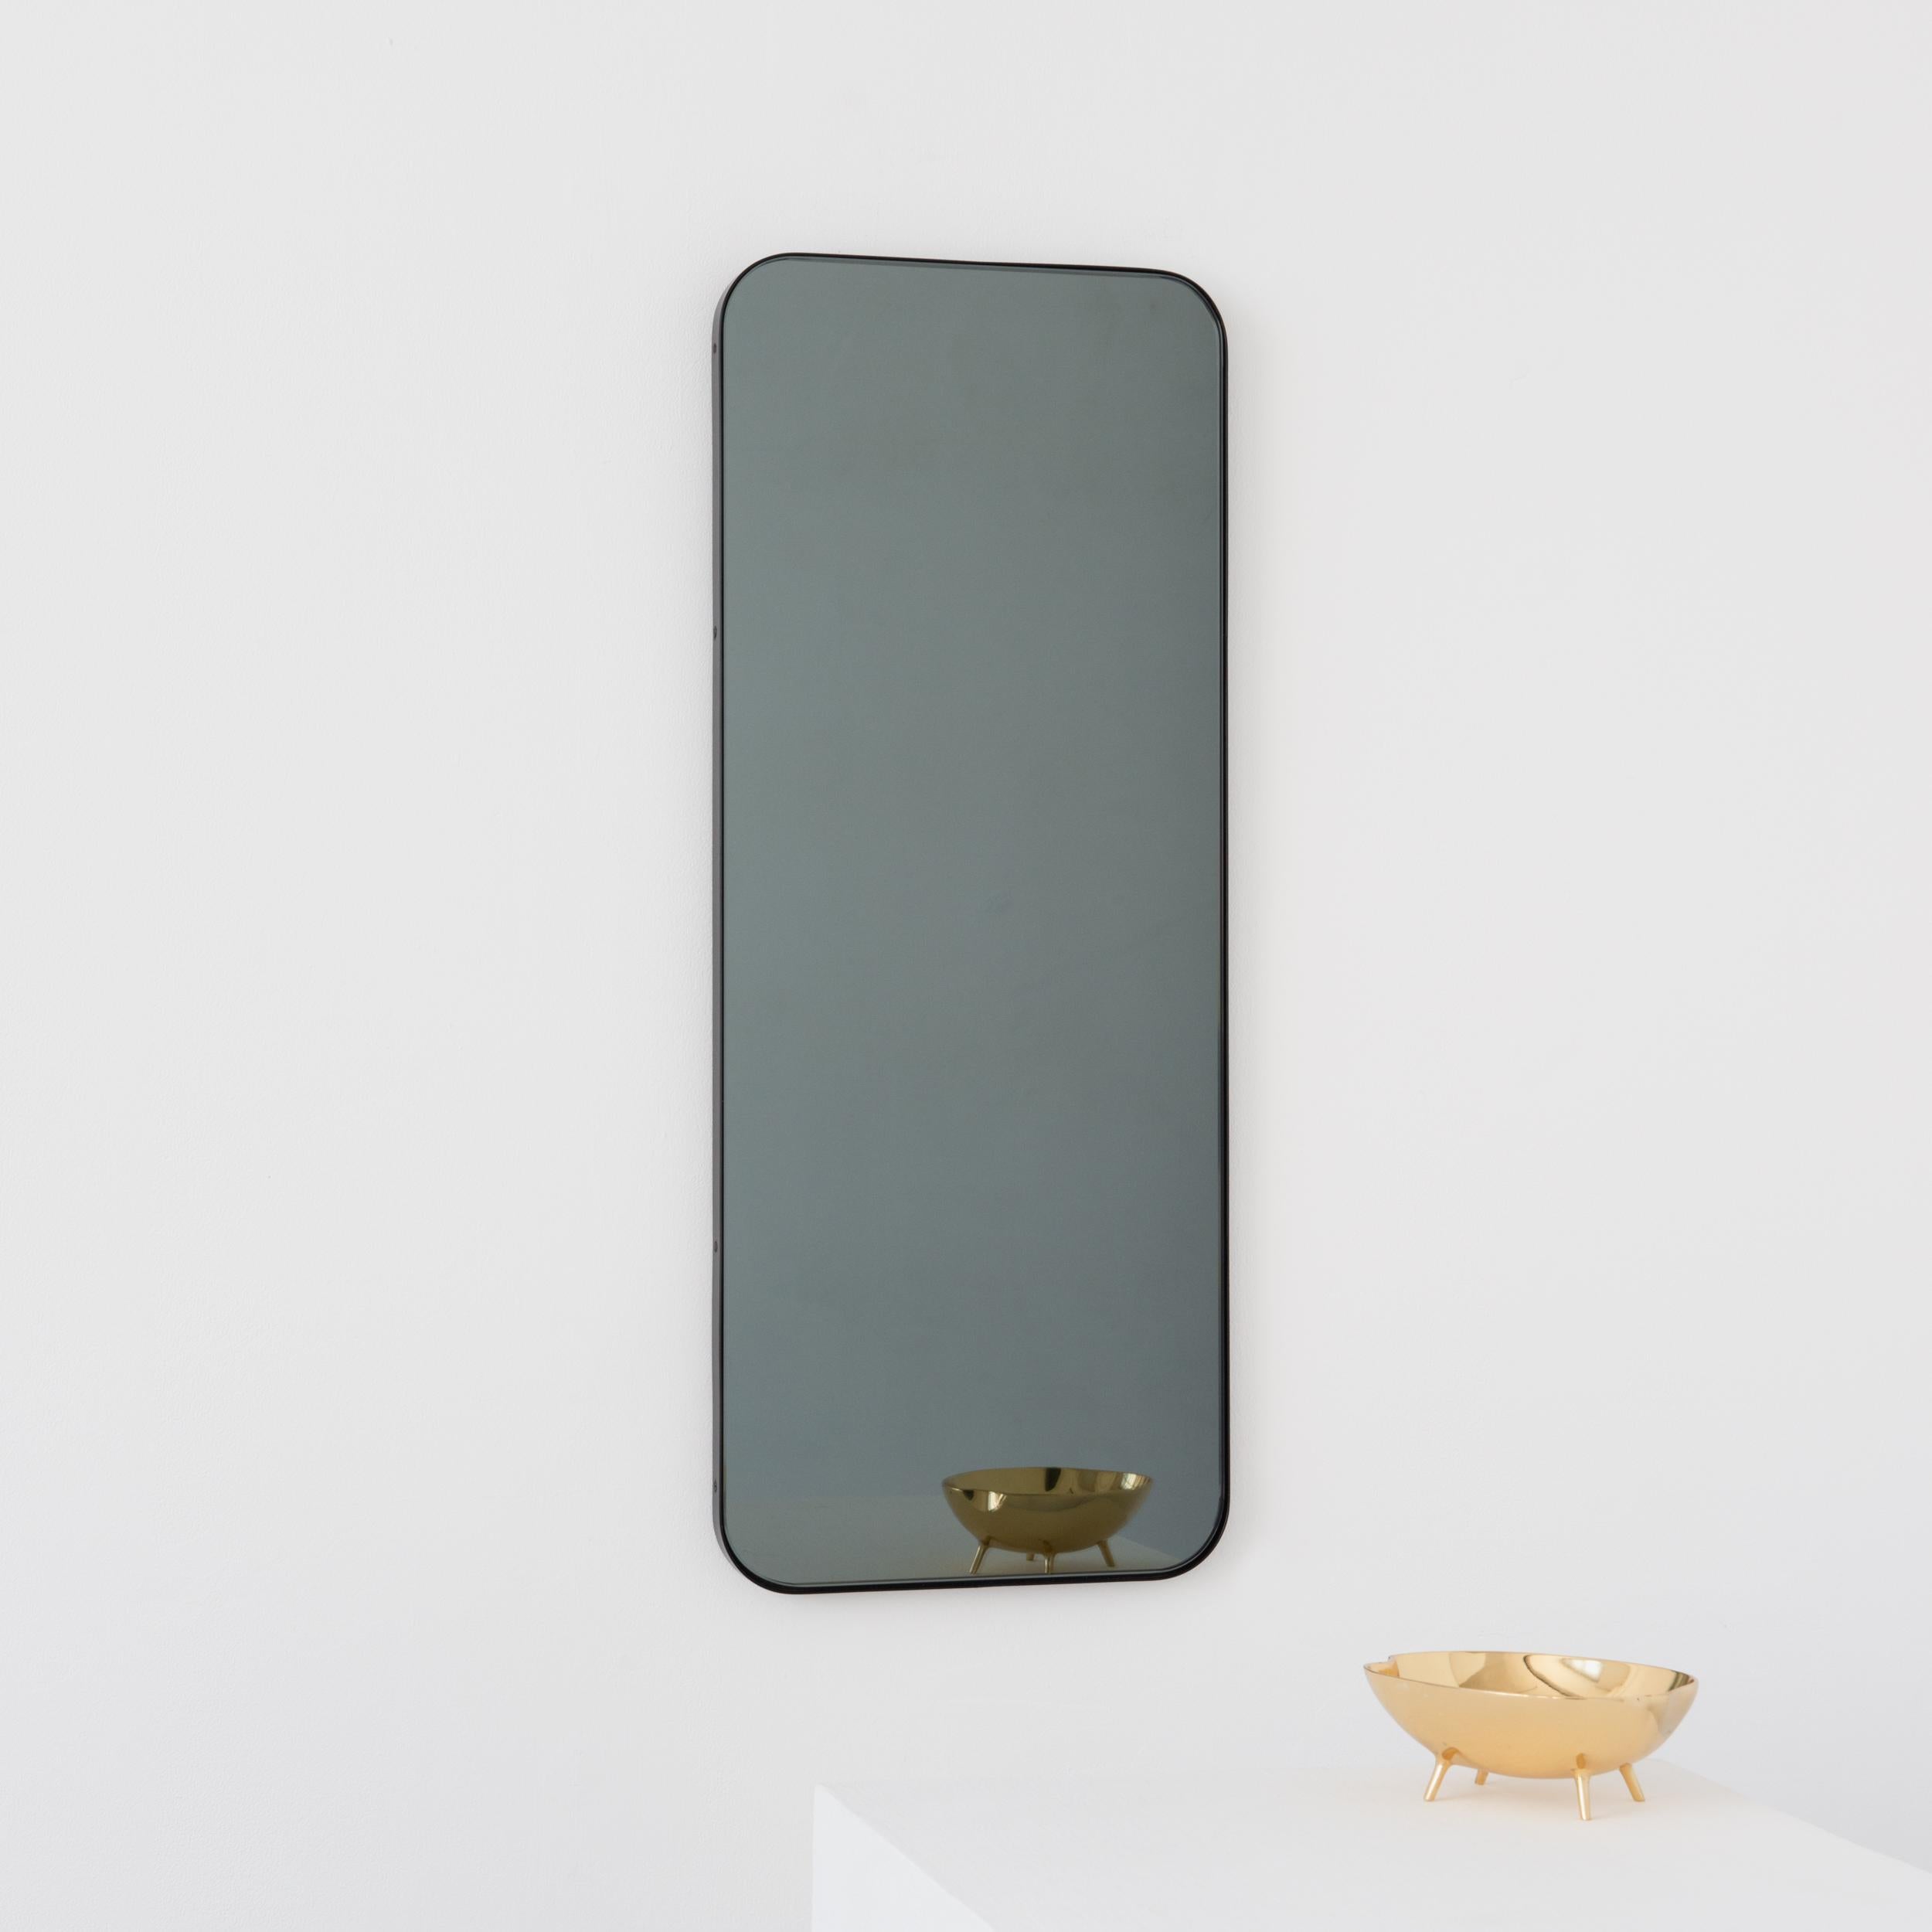 British In Stock Quadris Black Tinted Rectangular Mirror with a Black Frame, Small For Sale